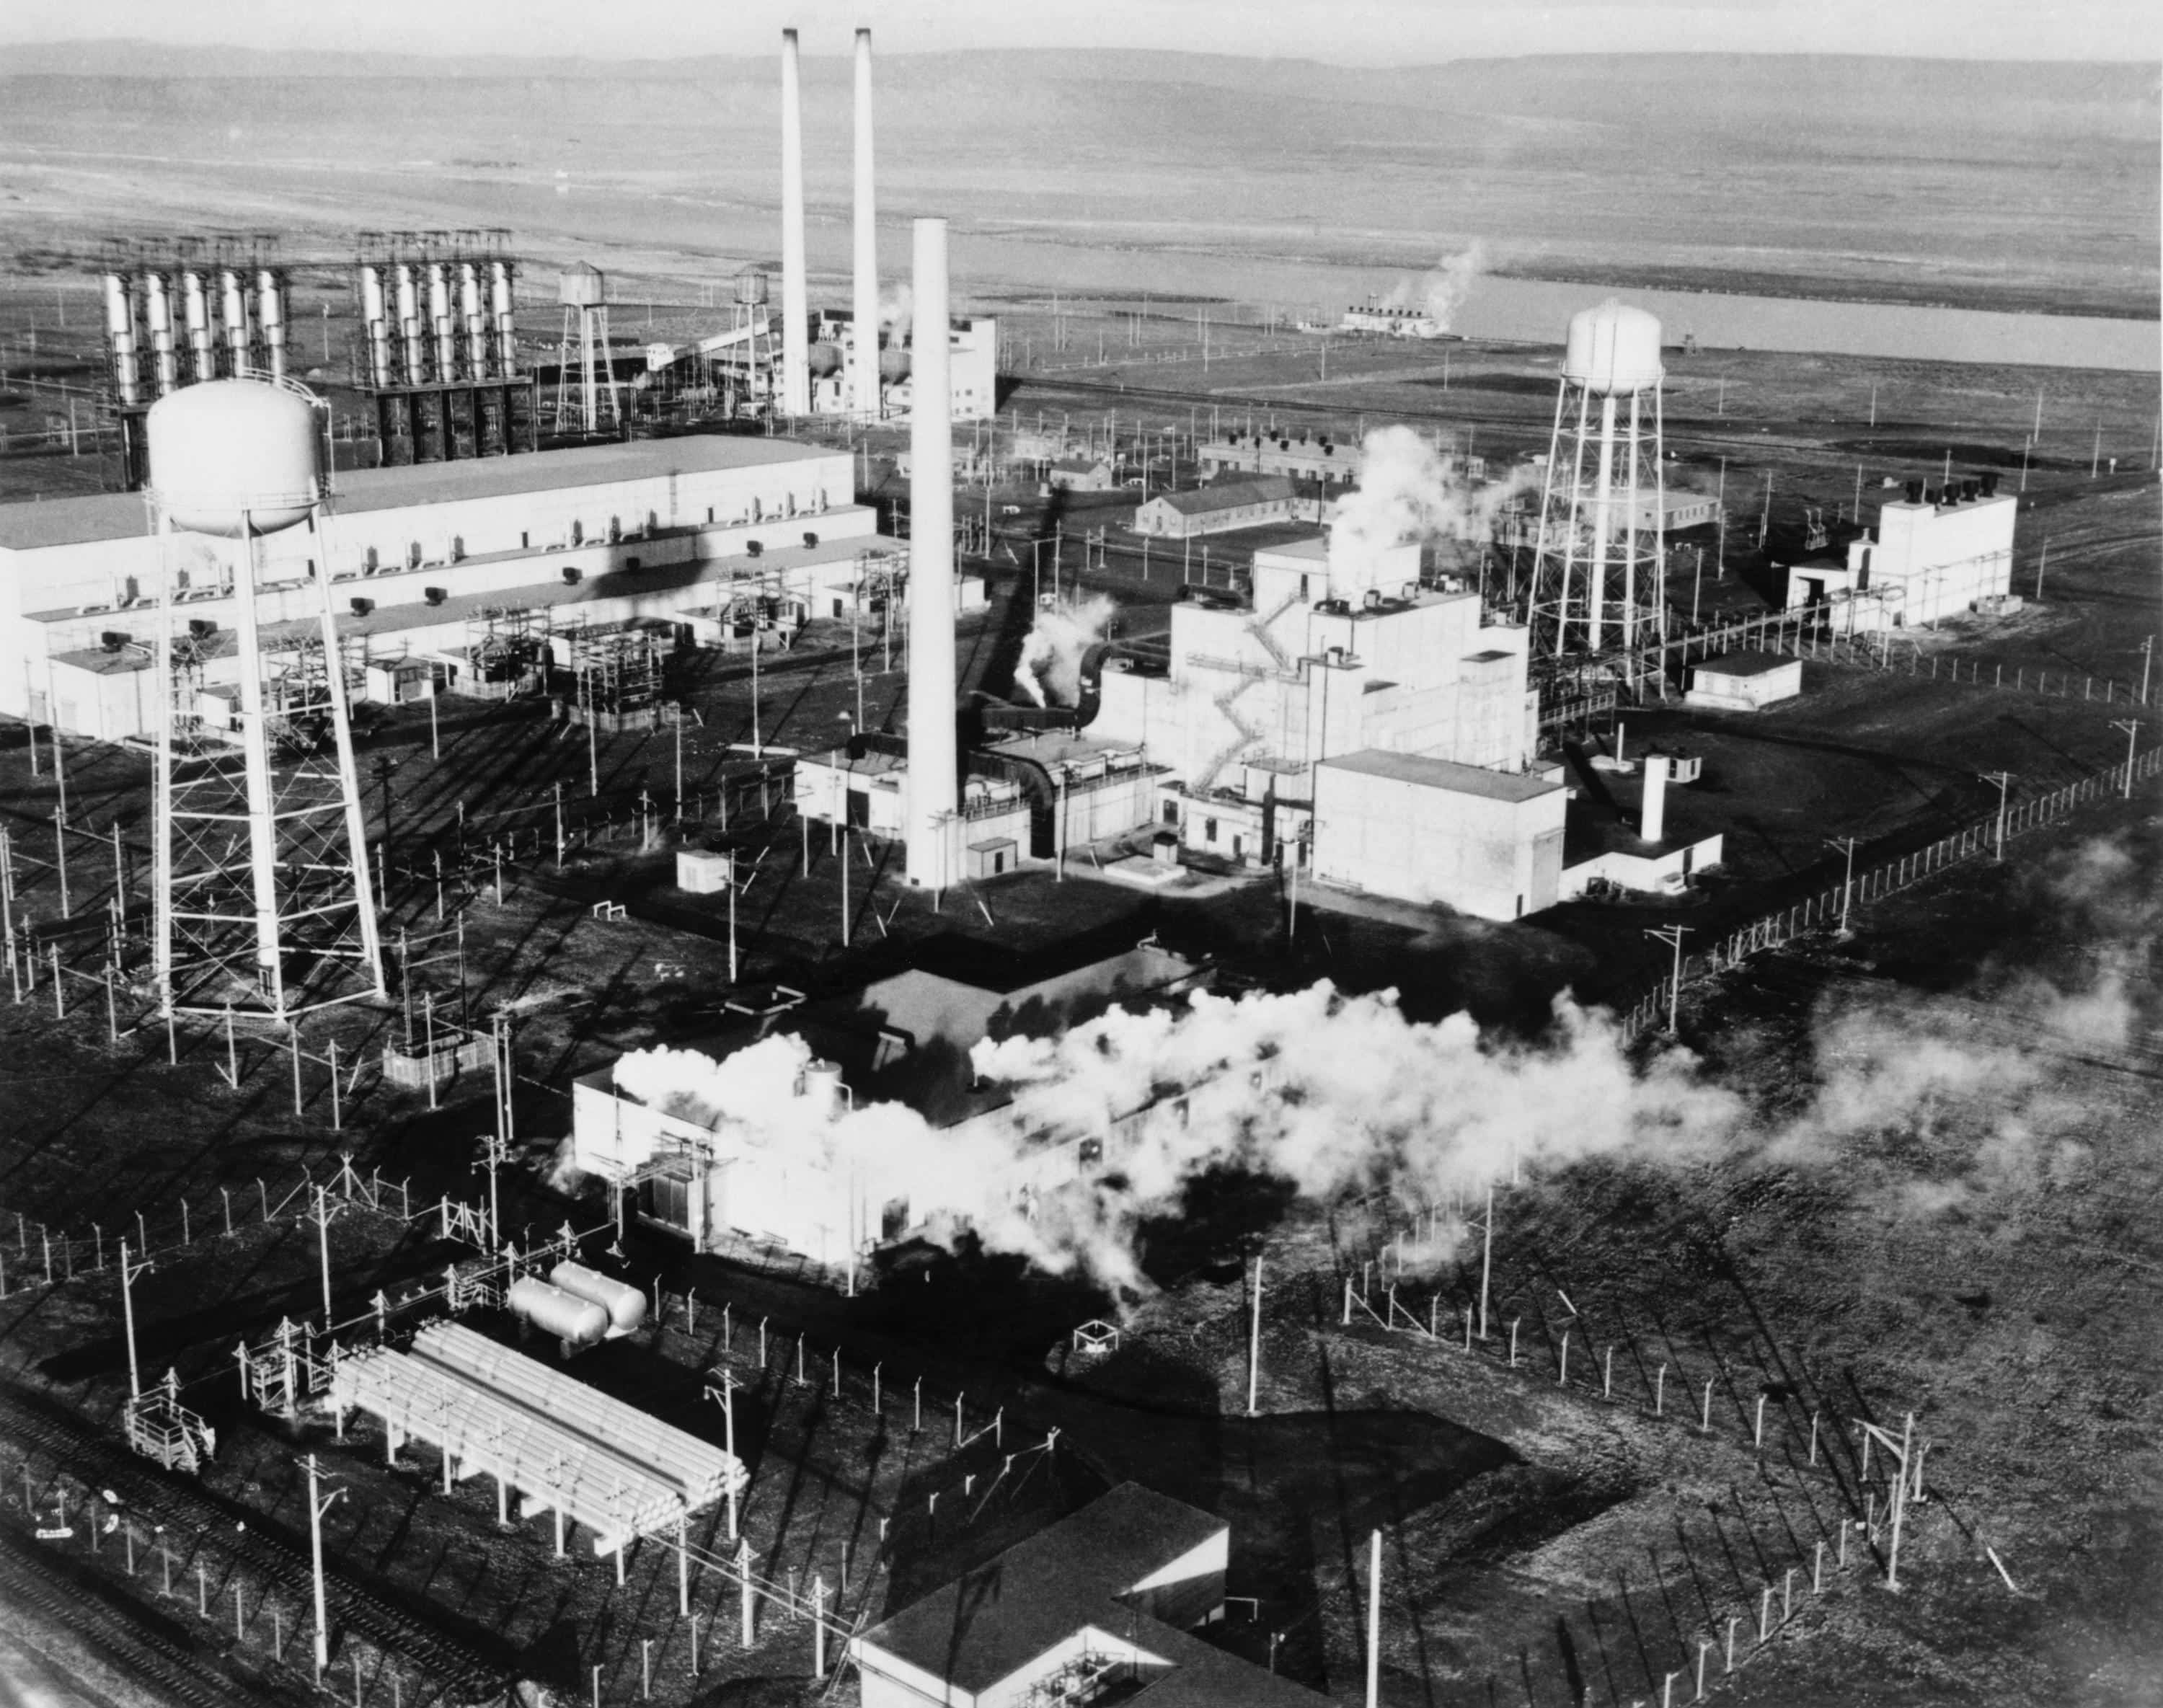 Aerial view of the 100-B Area with the Reactor B, the first large scale nuclear reactor ever built. The Hanford Site of the Manhattan Project produced the Plutonium-239 for the second atomic bomb.